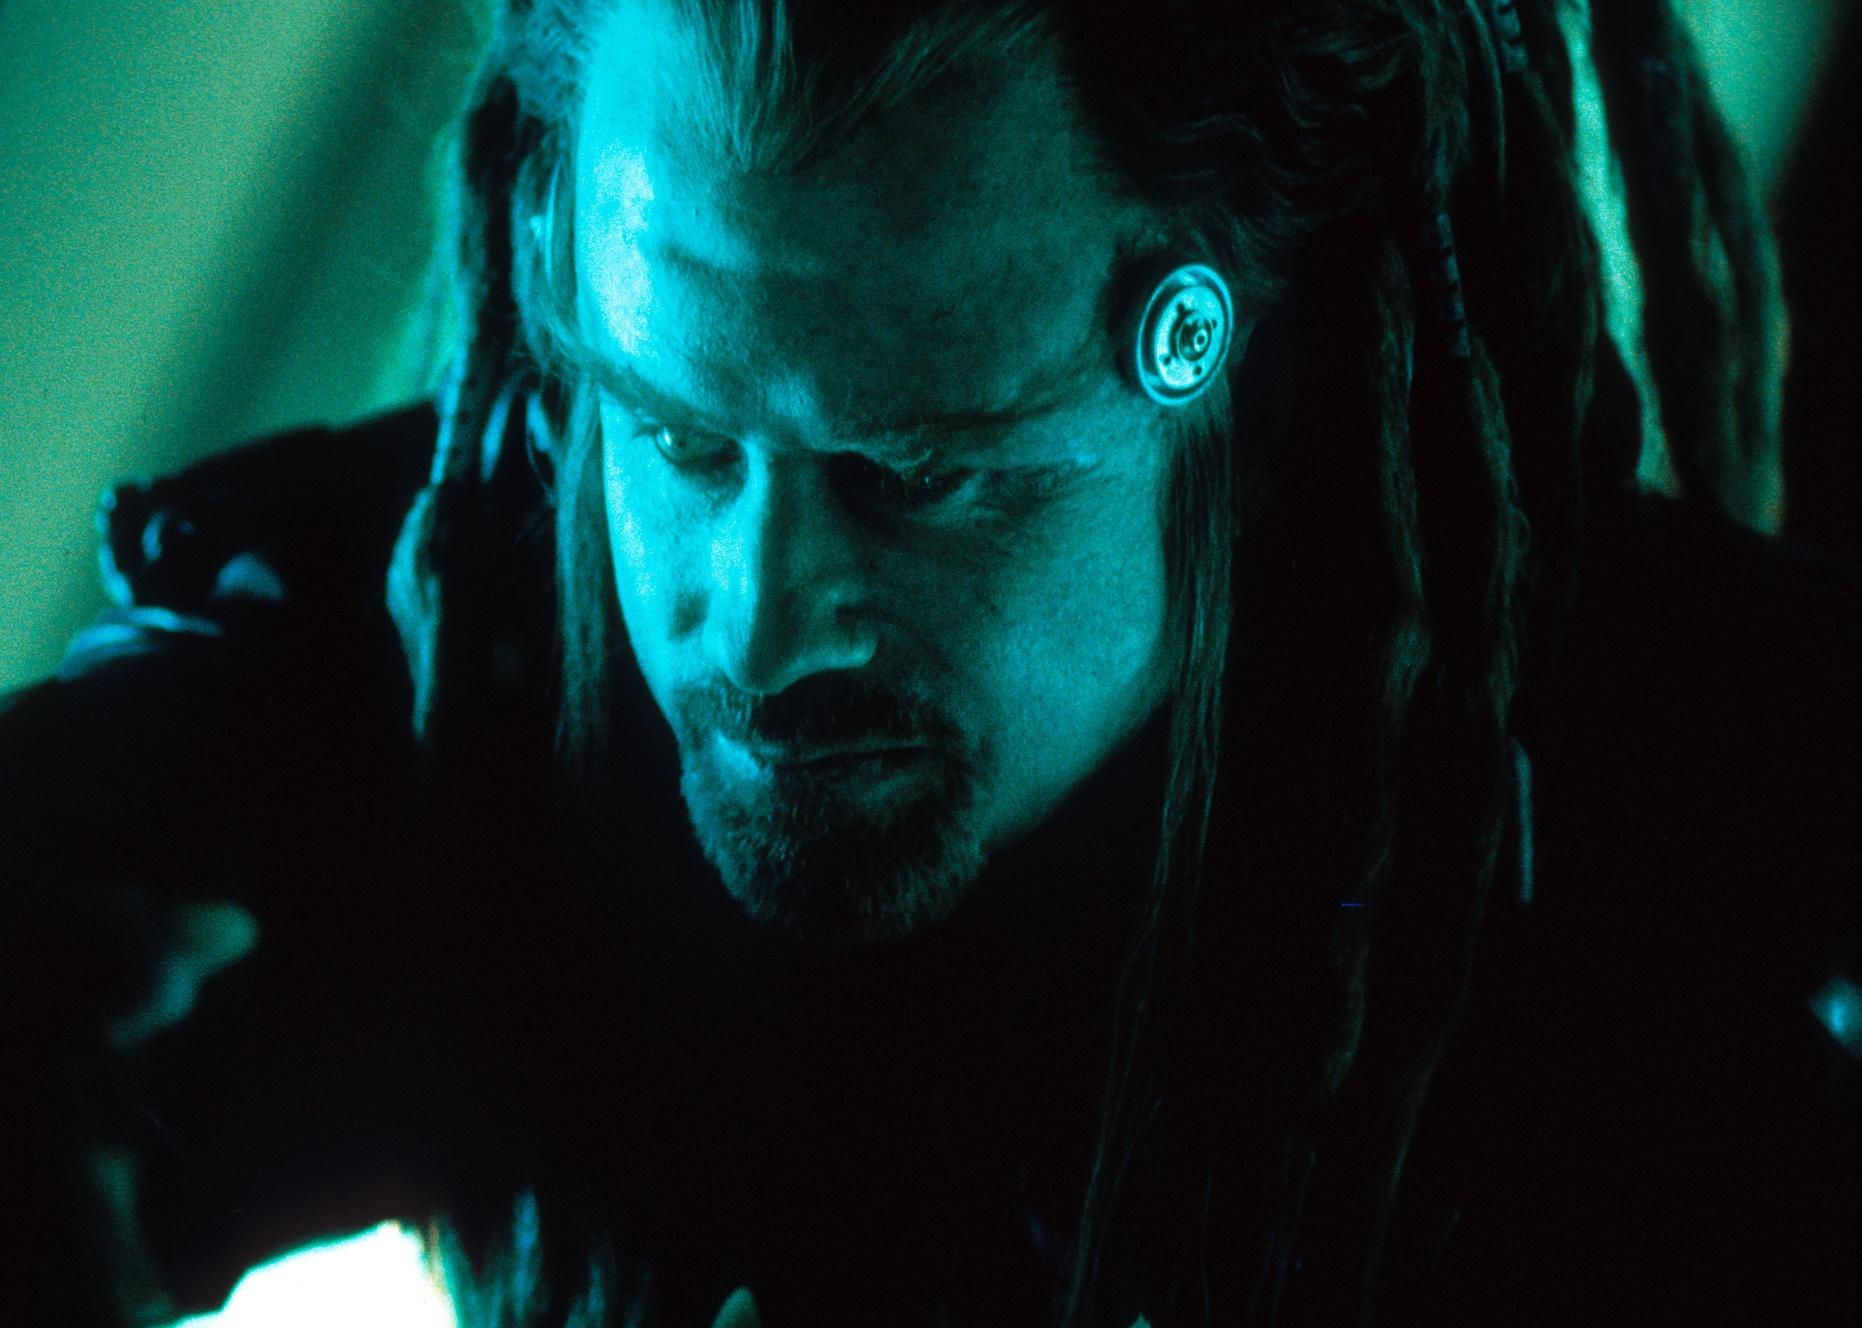 John Travolta under a green light with long dreadlocks and a round device on his temple.